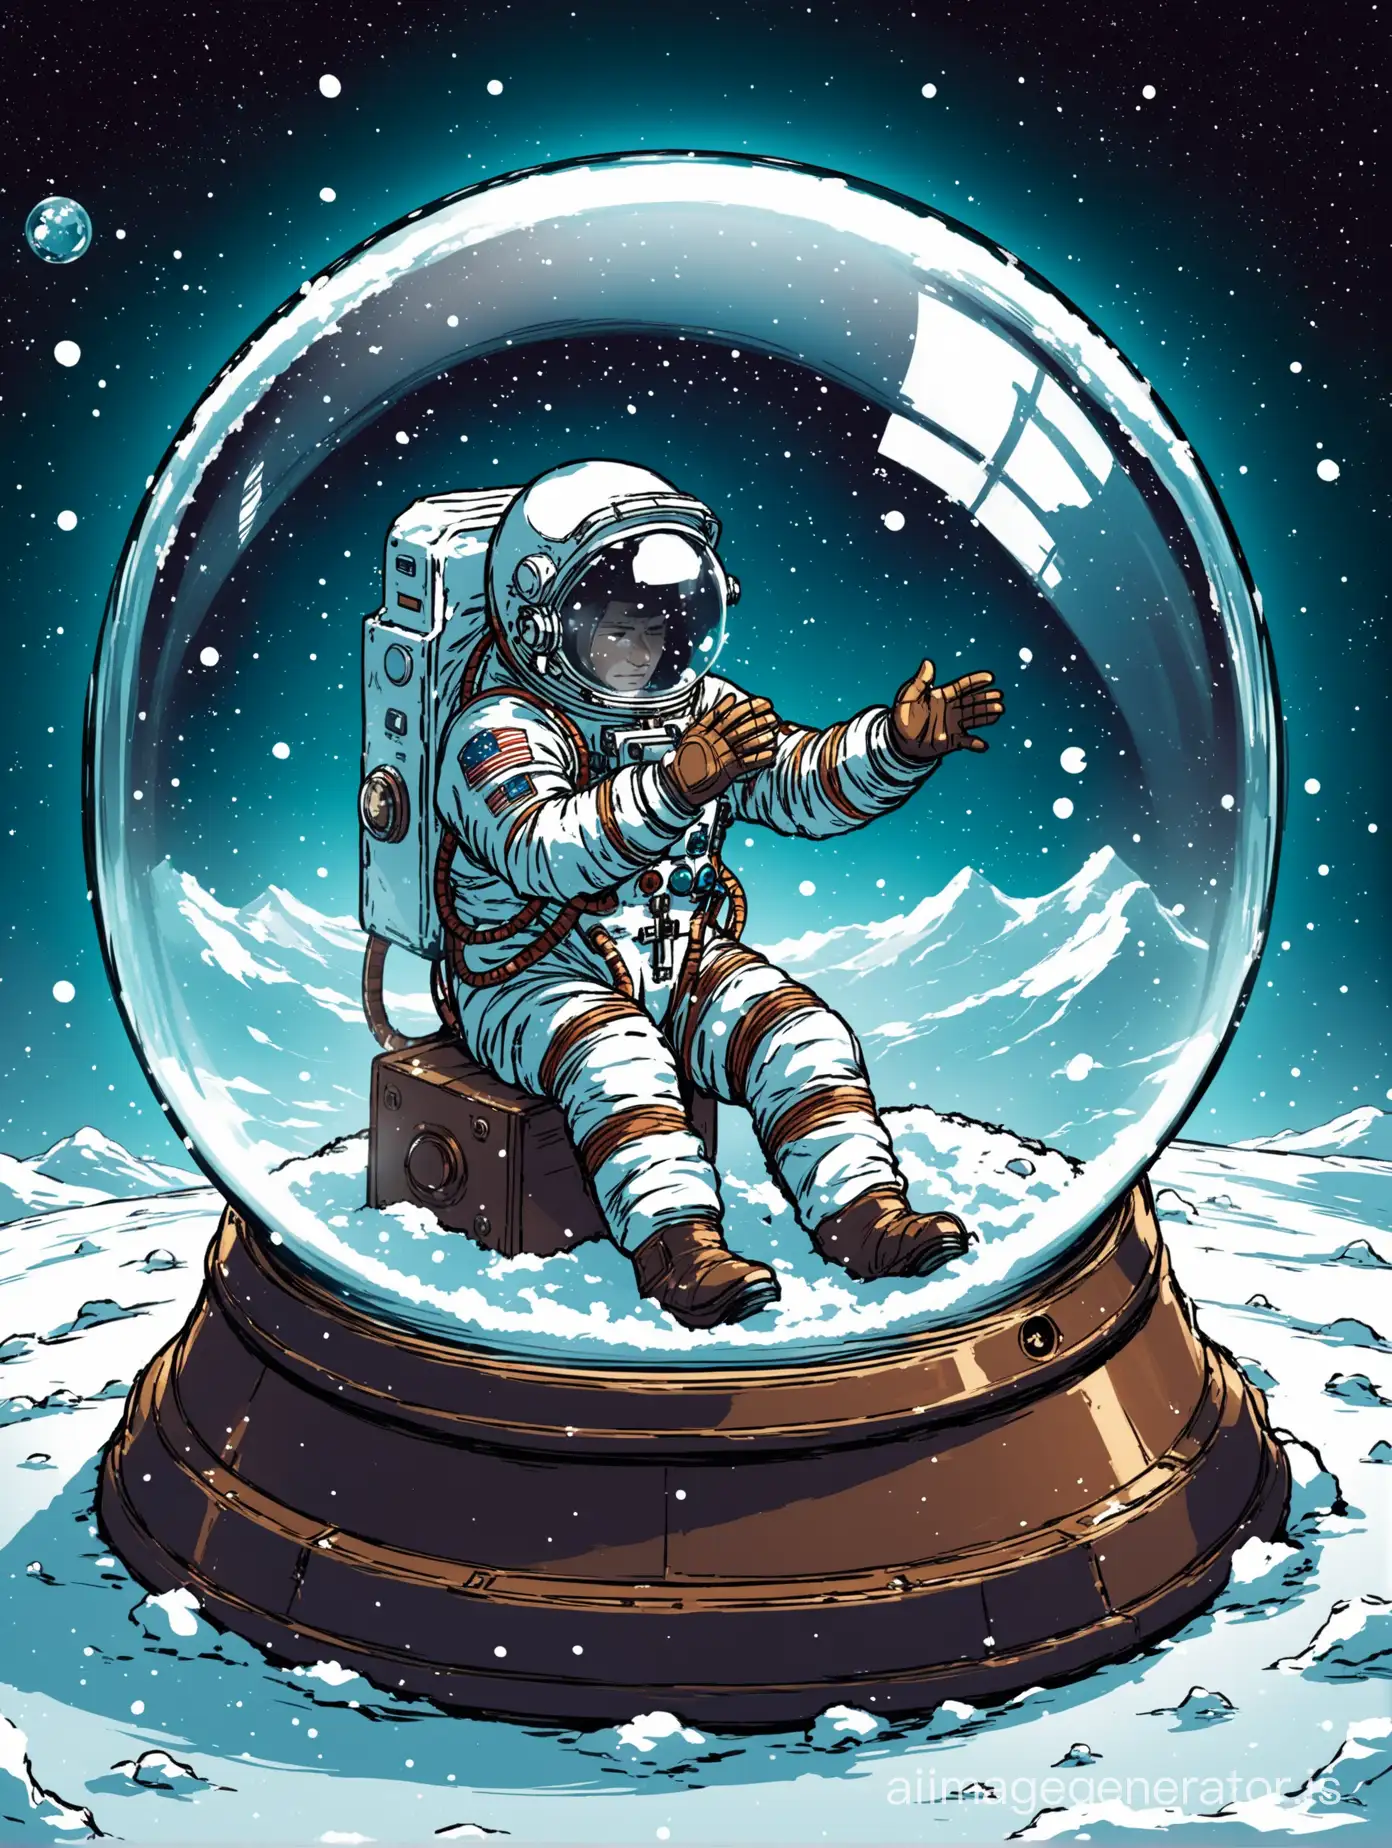 Glass snow globe, inside it a cosmonaut, he is in despair, he is locked, he is trapped, he doesn't know how to get out, his hands press on the globe from the inside